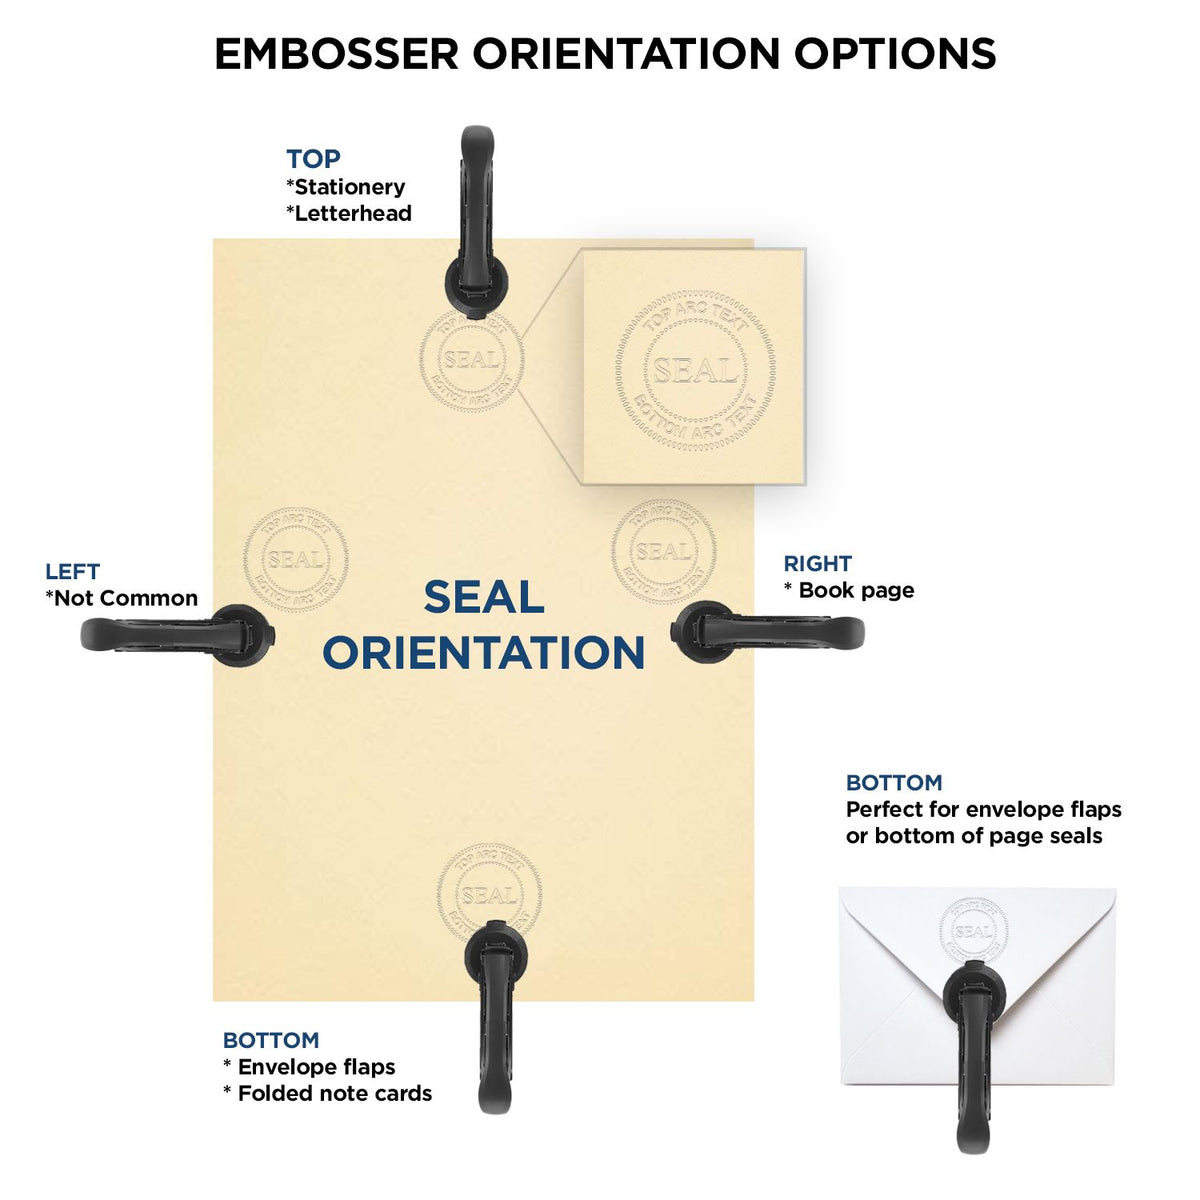 An infographic for the Heavy Duty Cast Iron Wyoming Engineer Seal Embosser showing embosser orientation, this is showing examples of a top, bottom, right and left insert.